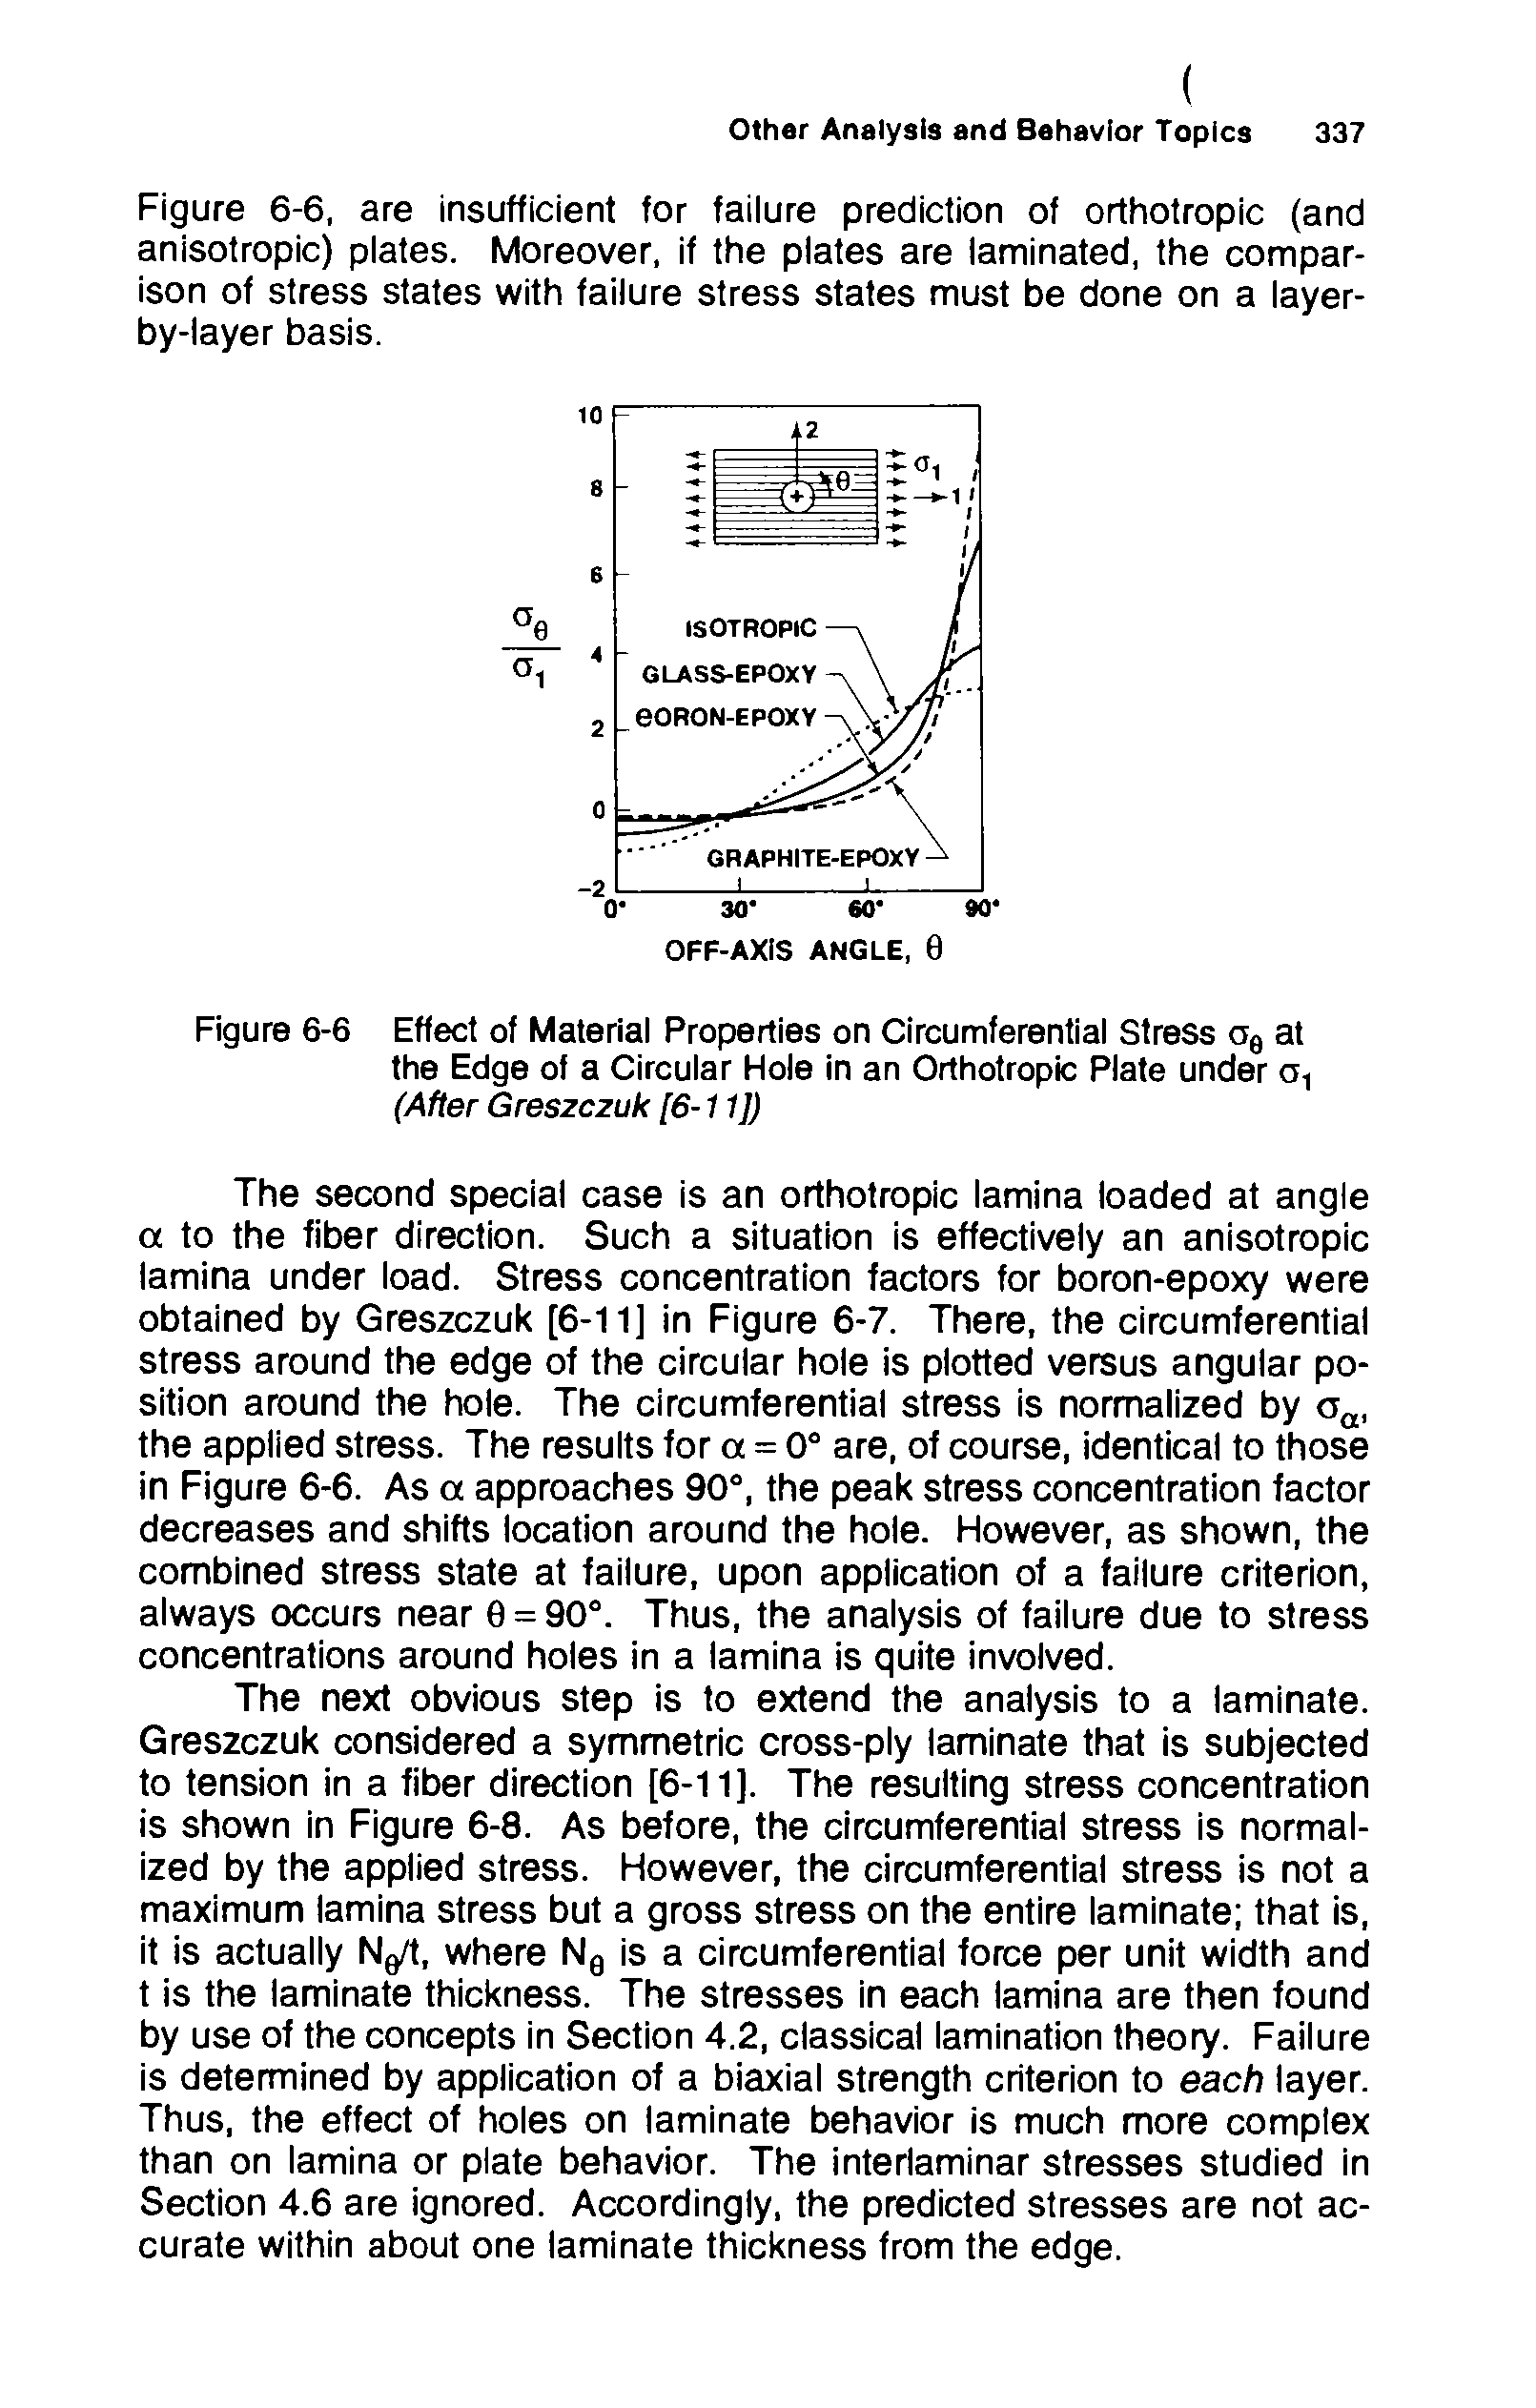 Figure 6-6 Effect of Material Properties on Circumferential Stress Gq at the Edge of a Circular Hole in an Orthotropic Plate under a, (After Greszczuk [6-11])...